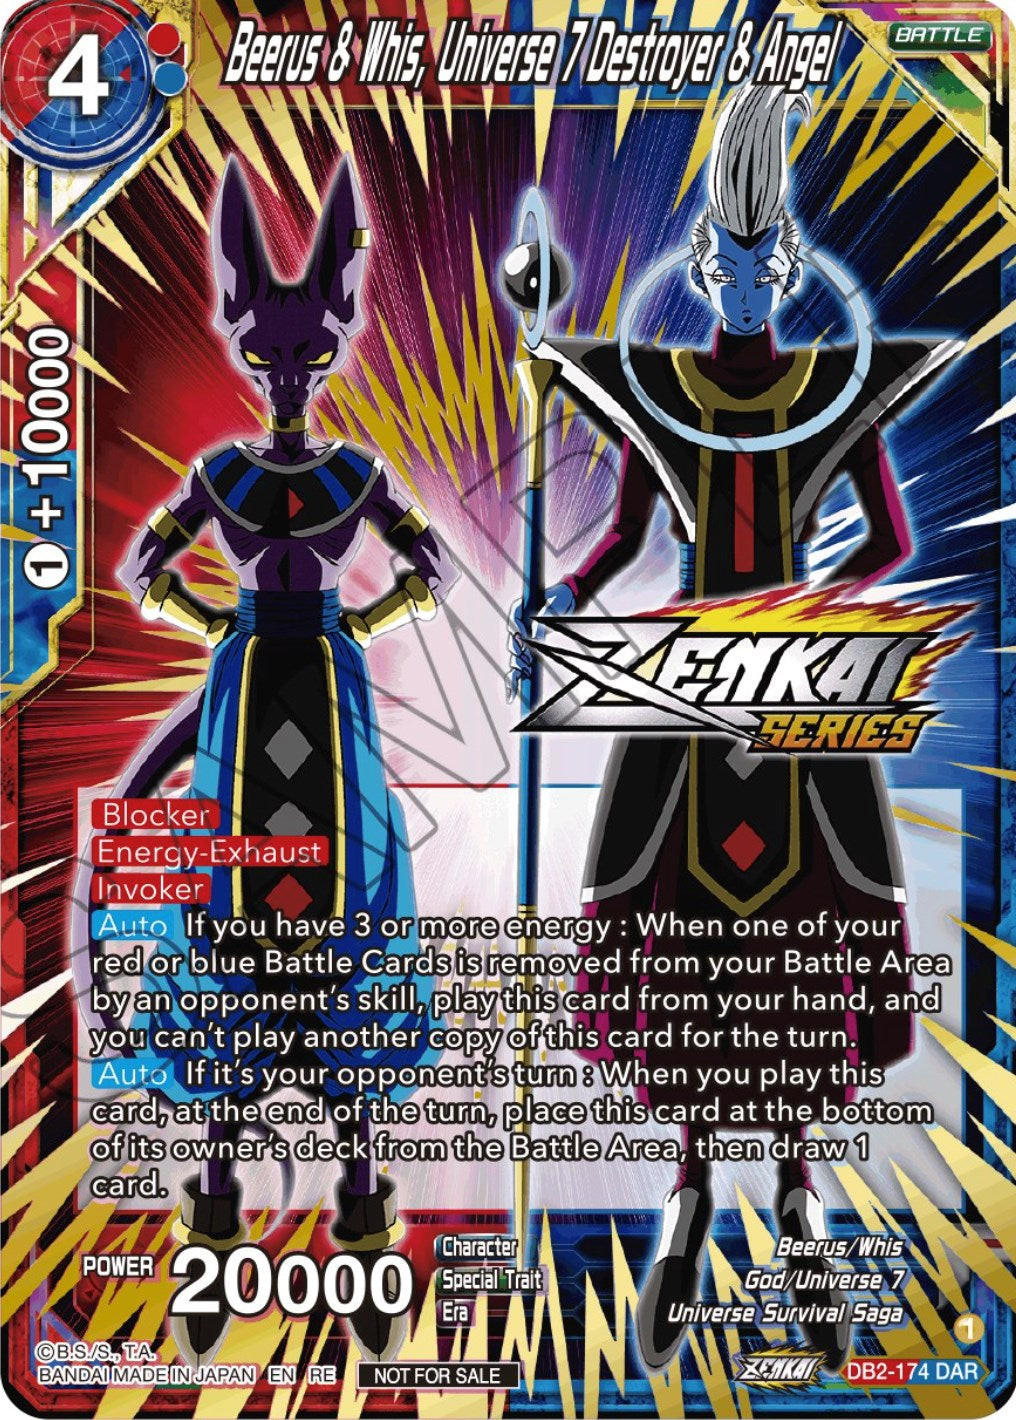 Beerus & Whis, Universe 7 Destroyer & Angel (Event Pack 12) (DB2-174) [Tournament Promotion Cards] | Pegasus Games WI